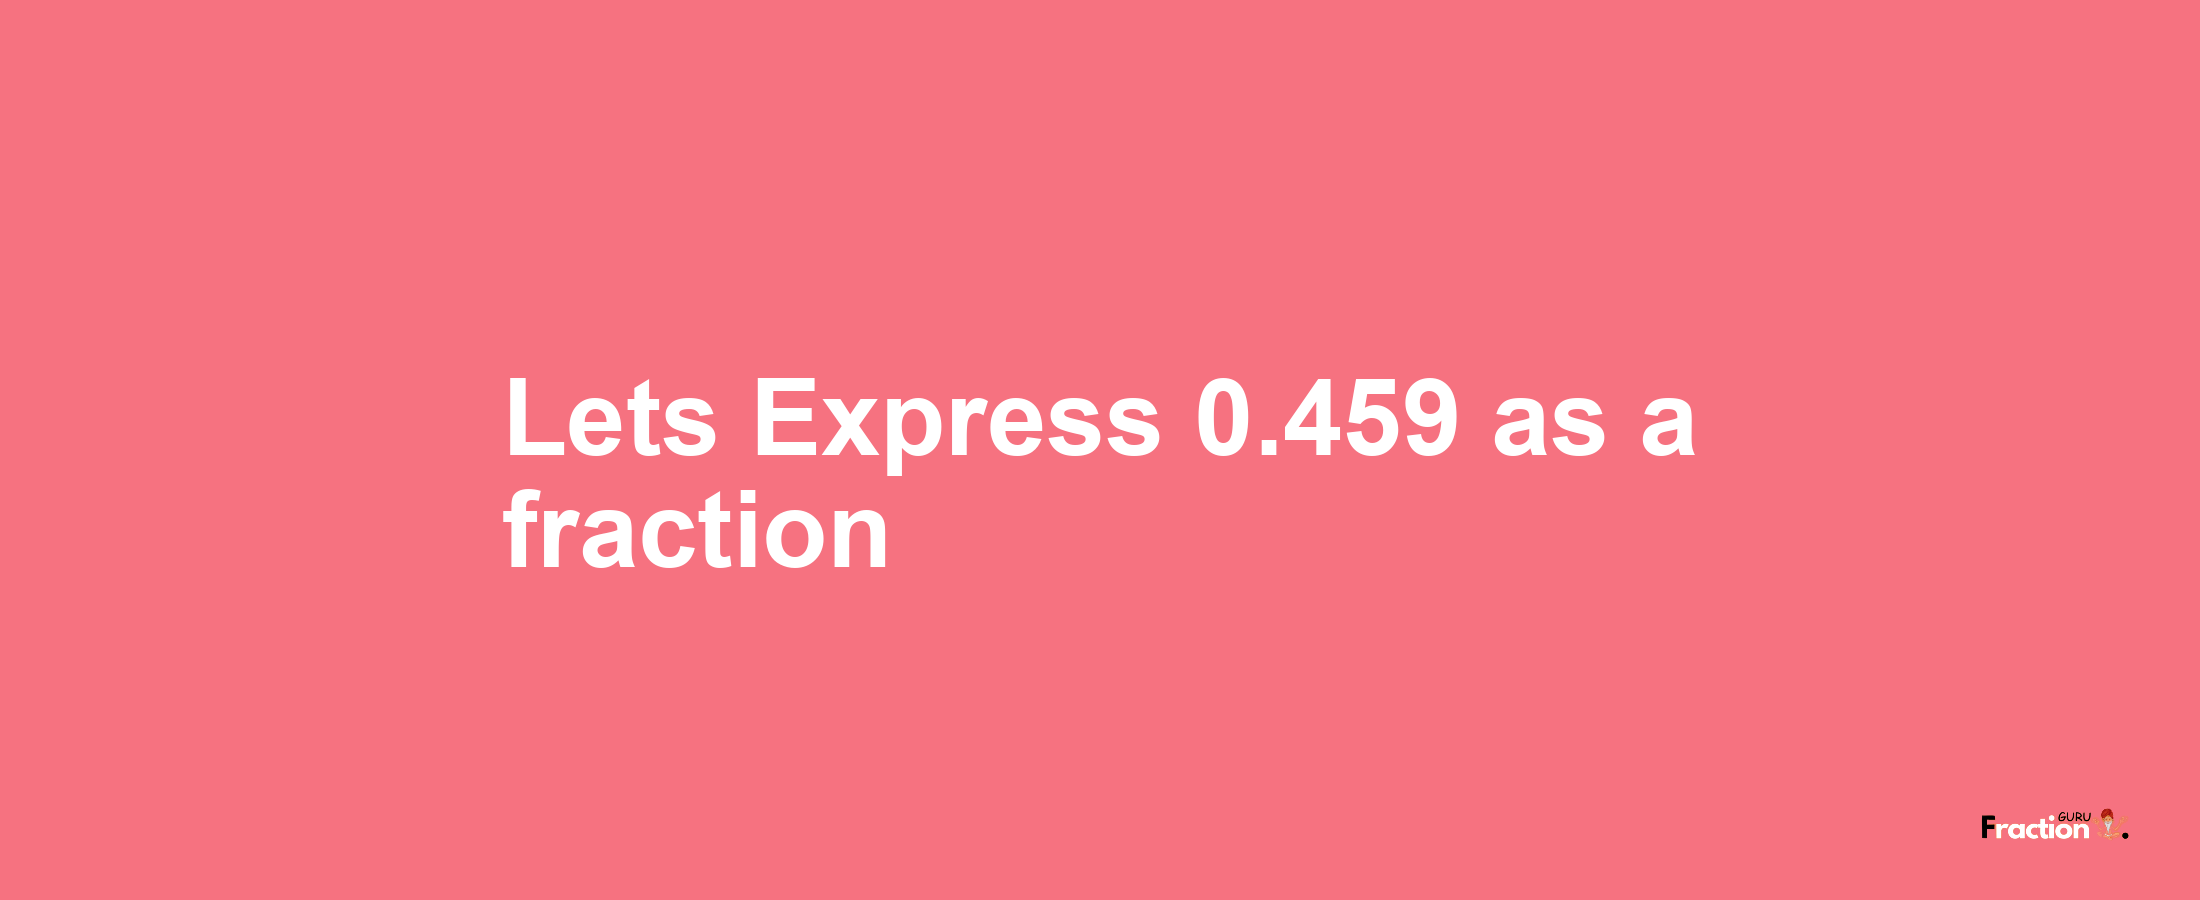 Lets Express 0.459 as afraction